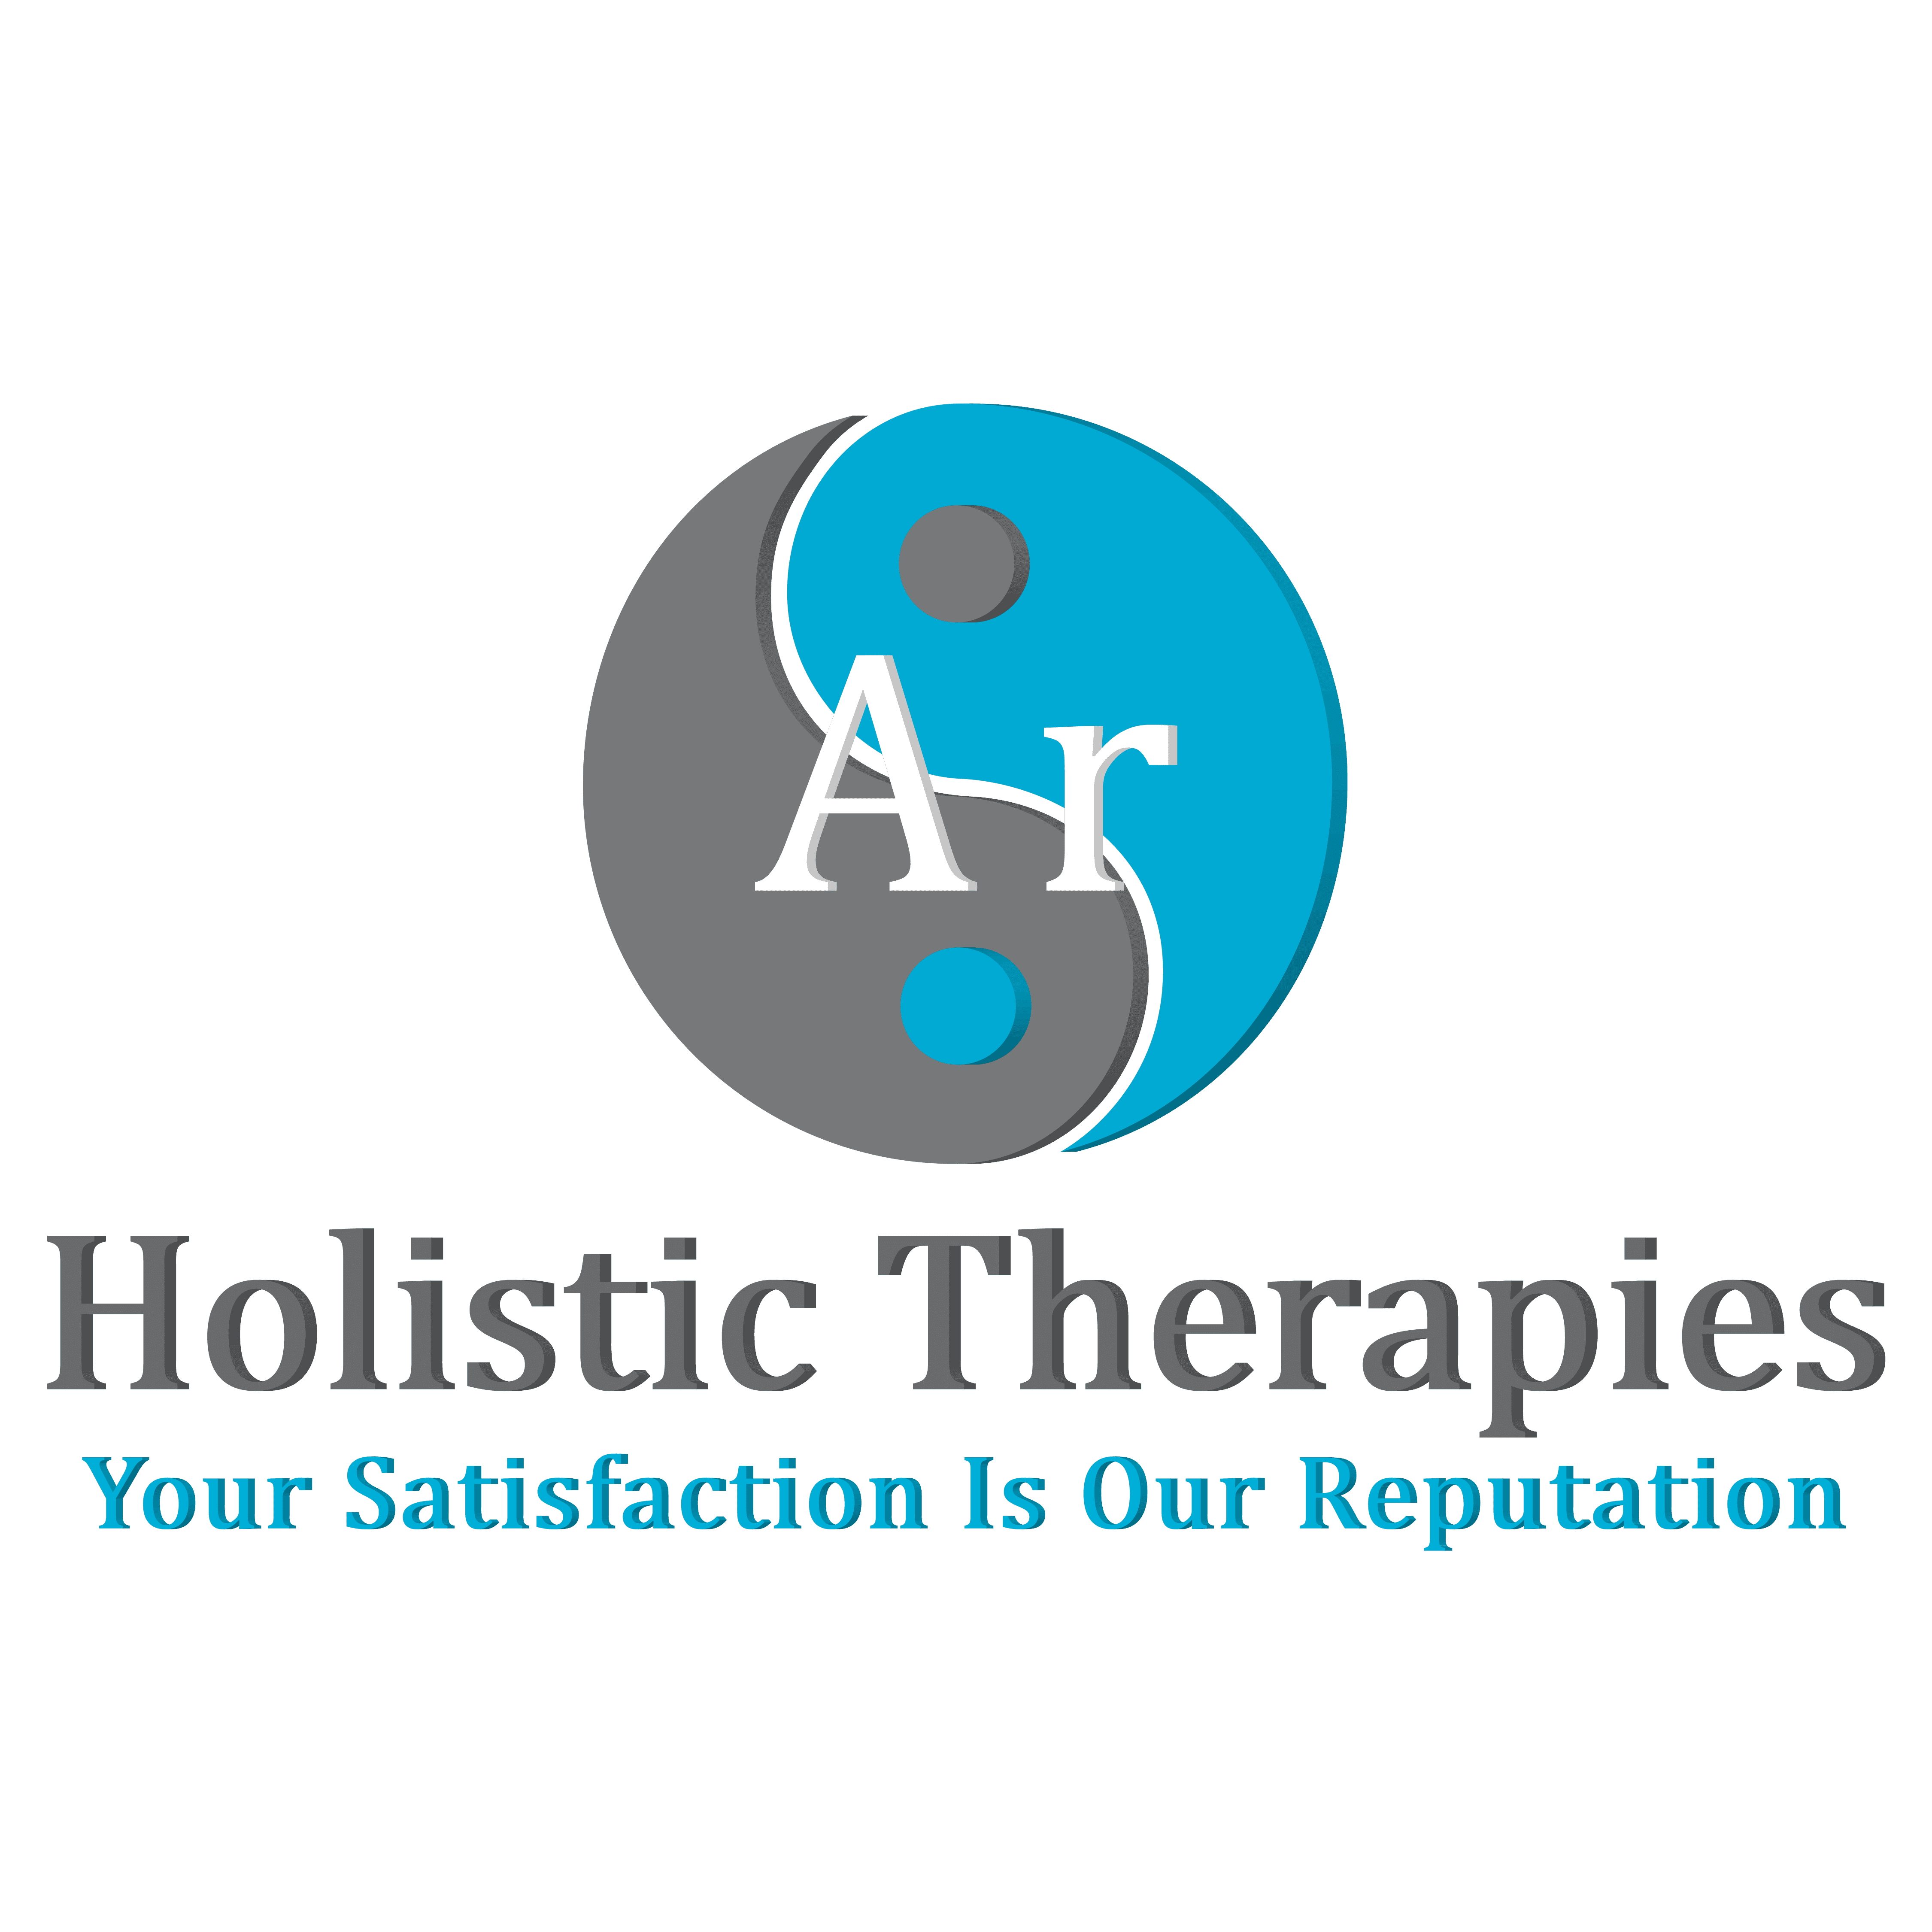 Mohammed Arshad – AR Holistic Therapies